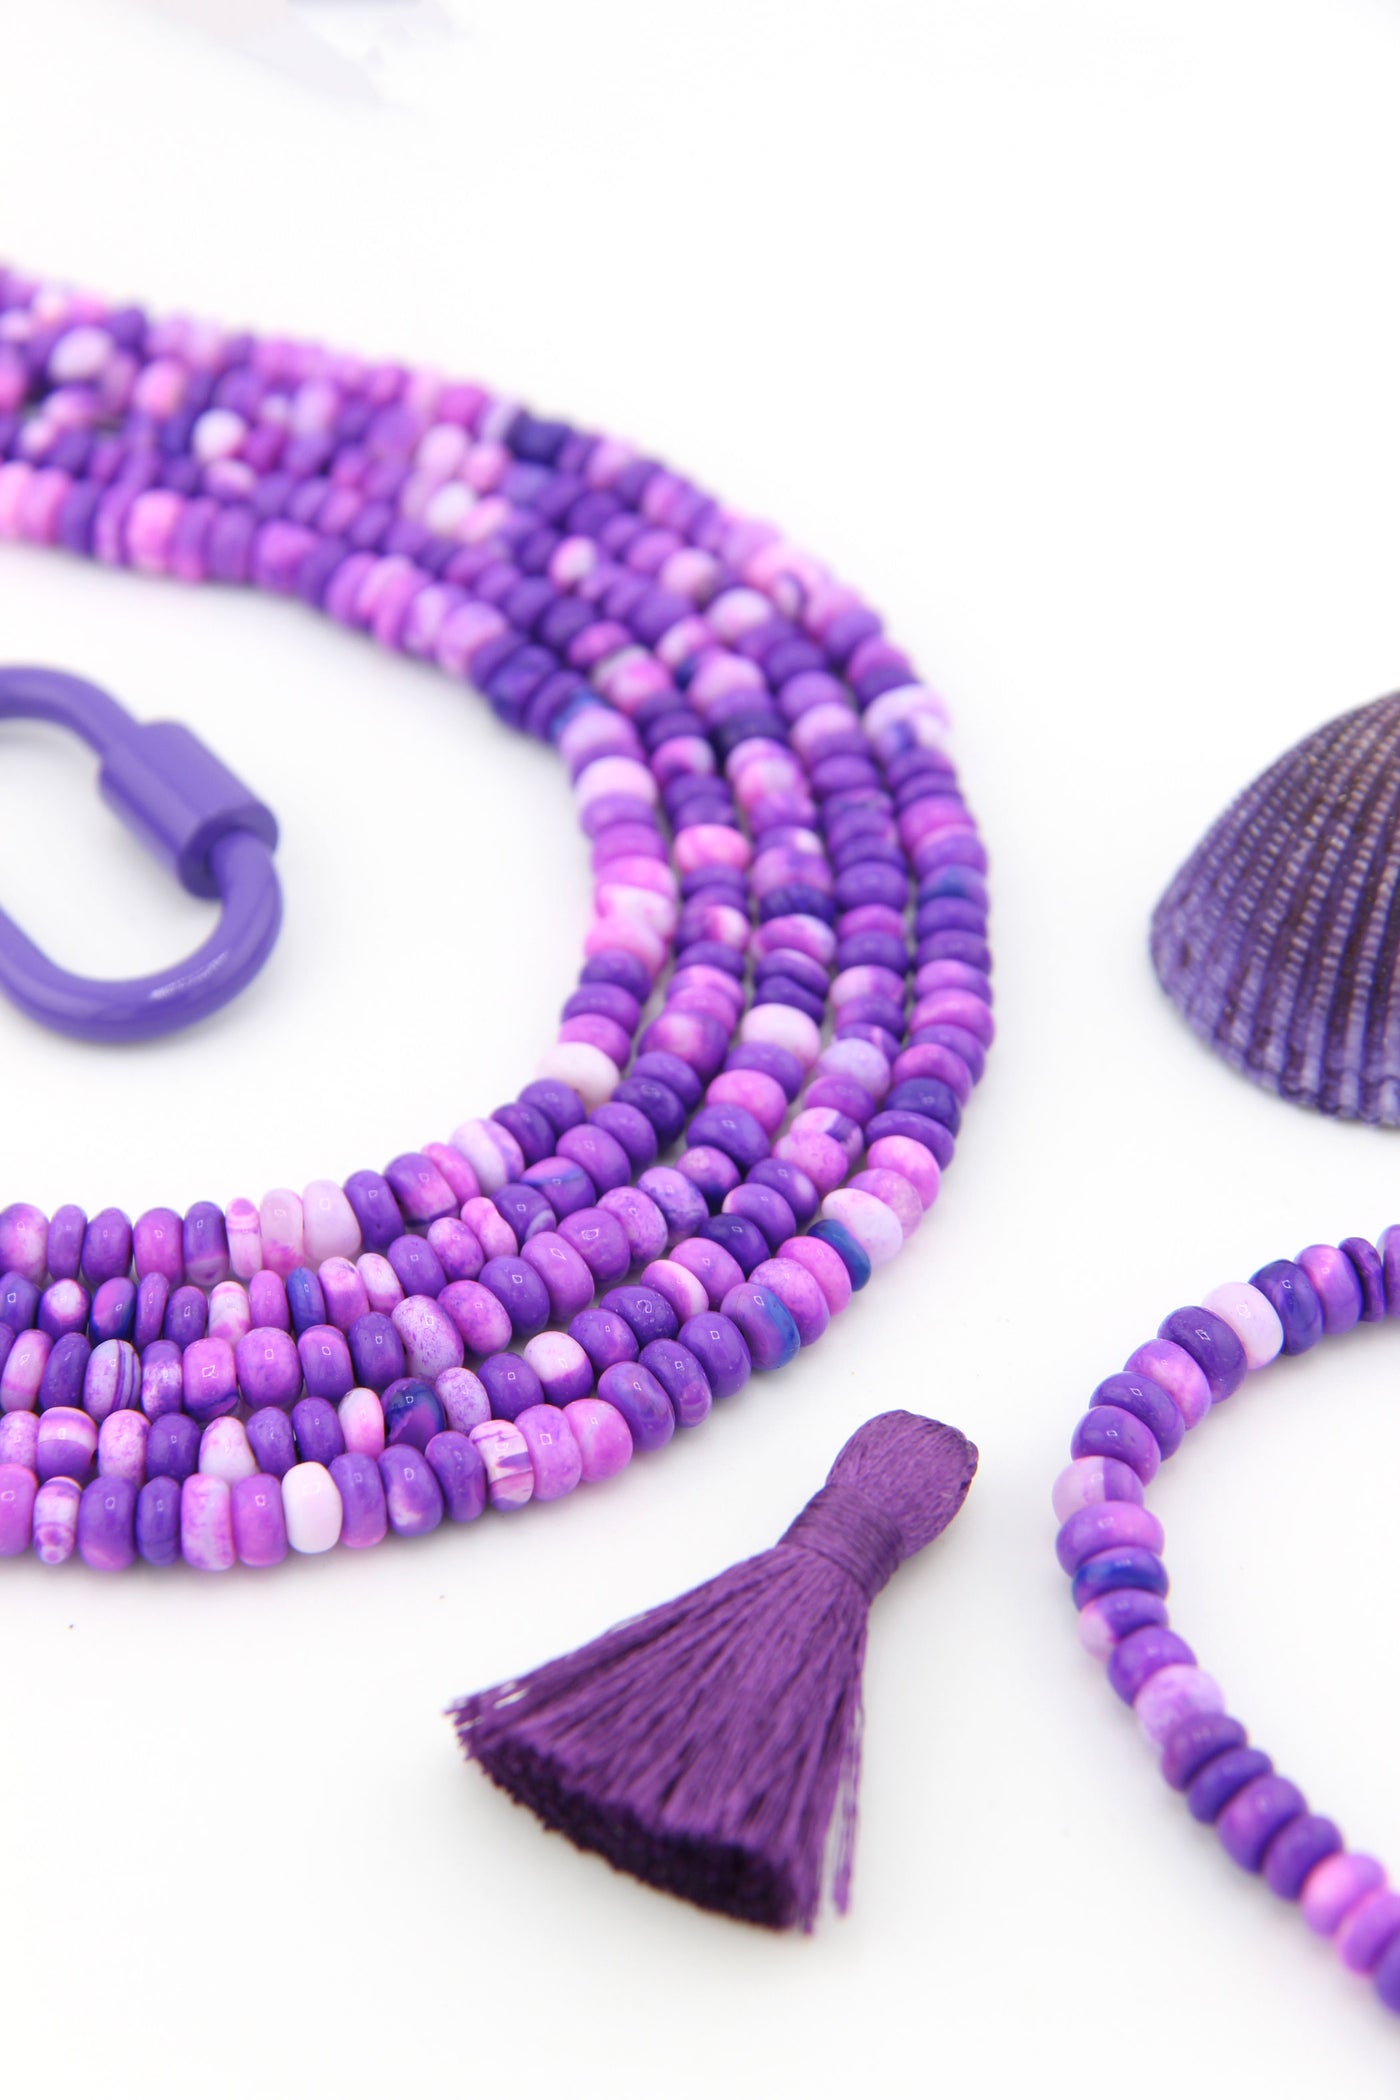 Purple Opal Smooth Rondelle Beads 5-5.5mm Lavender Opal Rondelle Beads,  Dyed Opal Beads 13 Strand